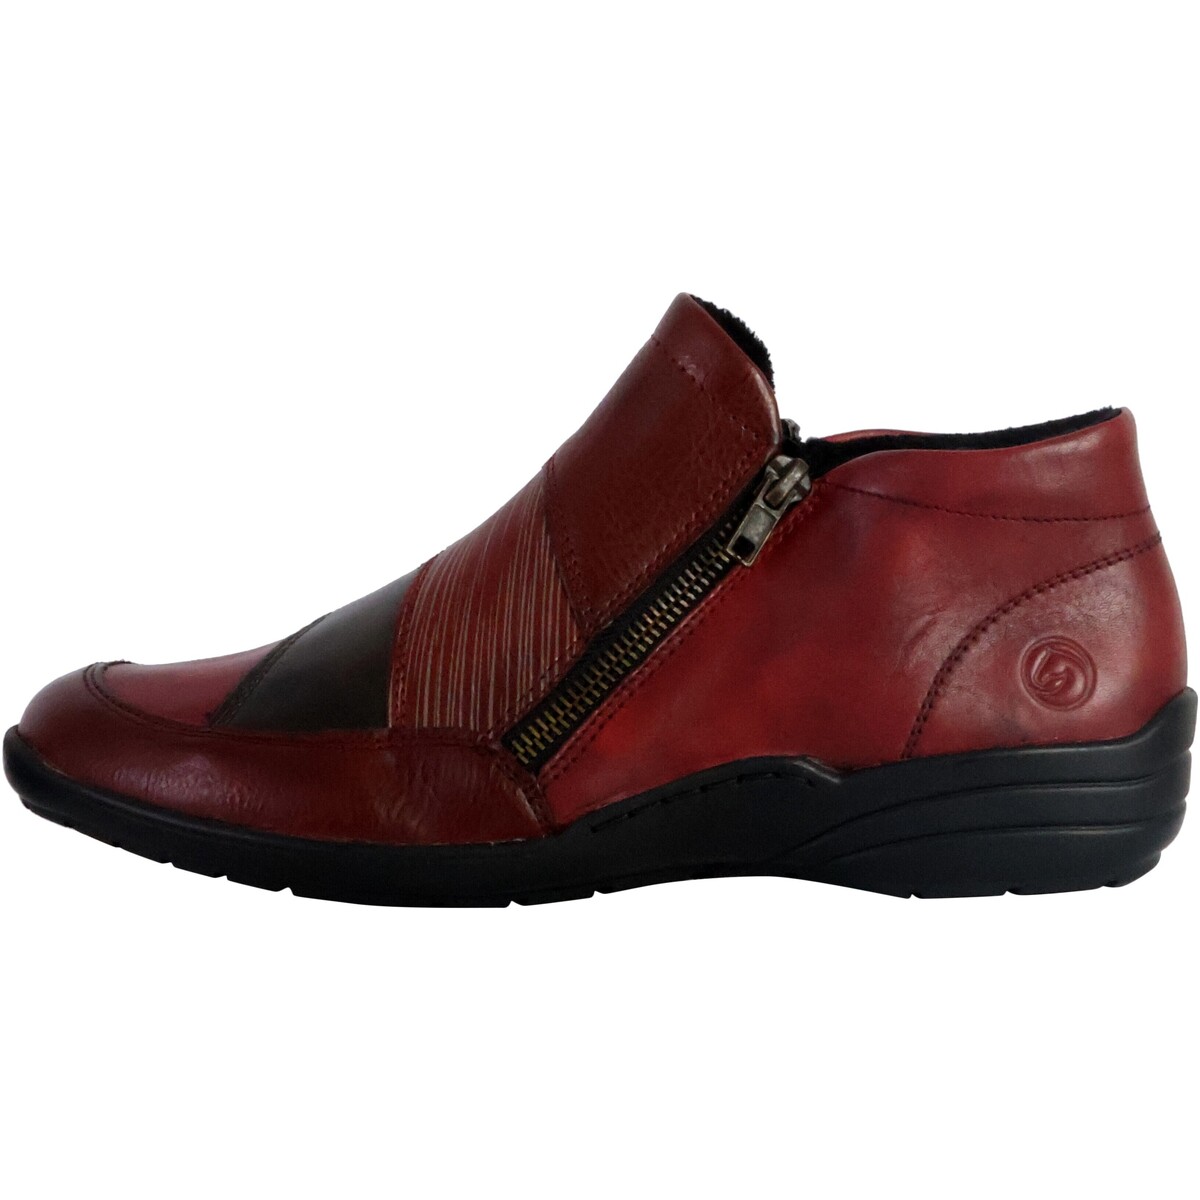 Chaussures Femme Boots Remonte Derby Cuir Rouge